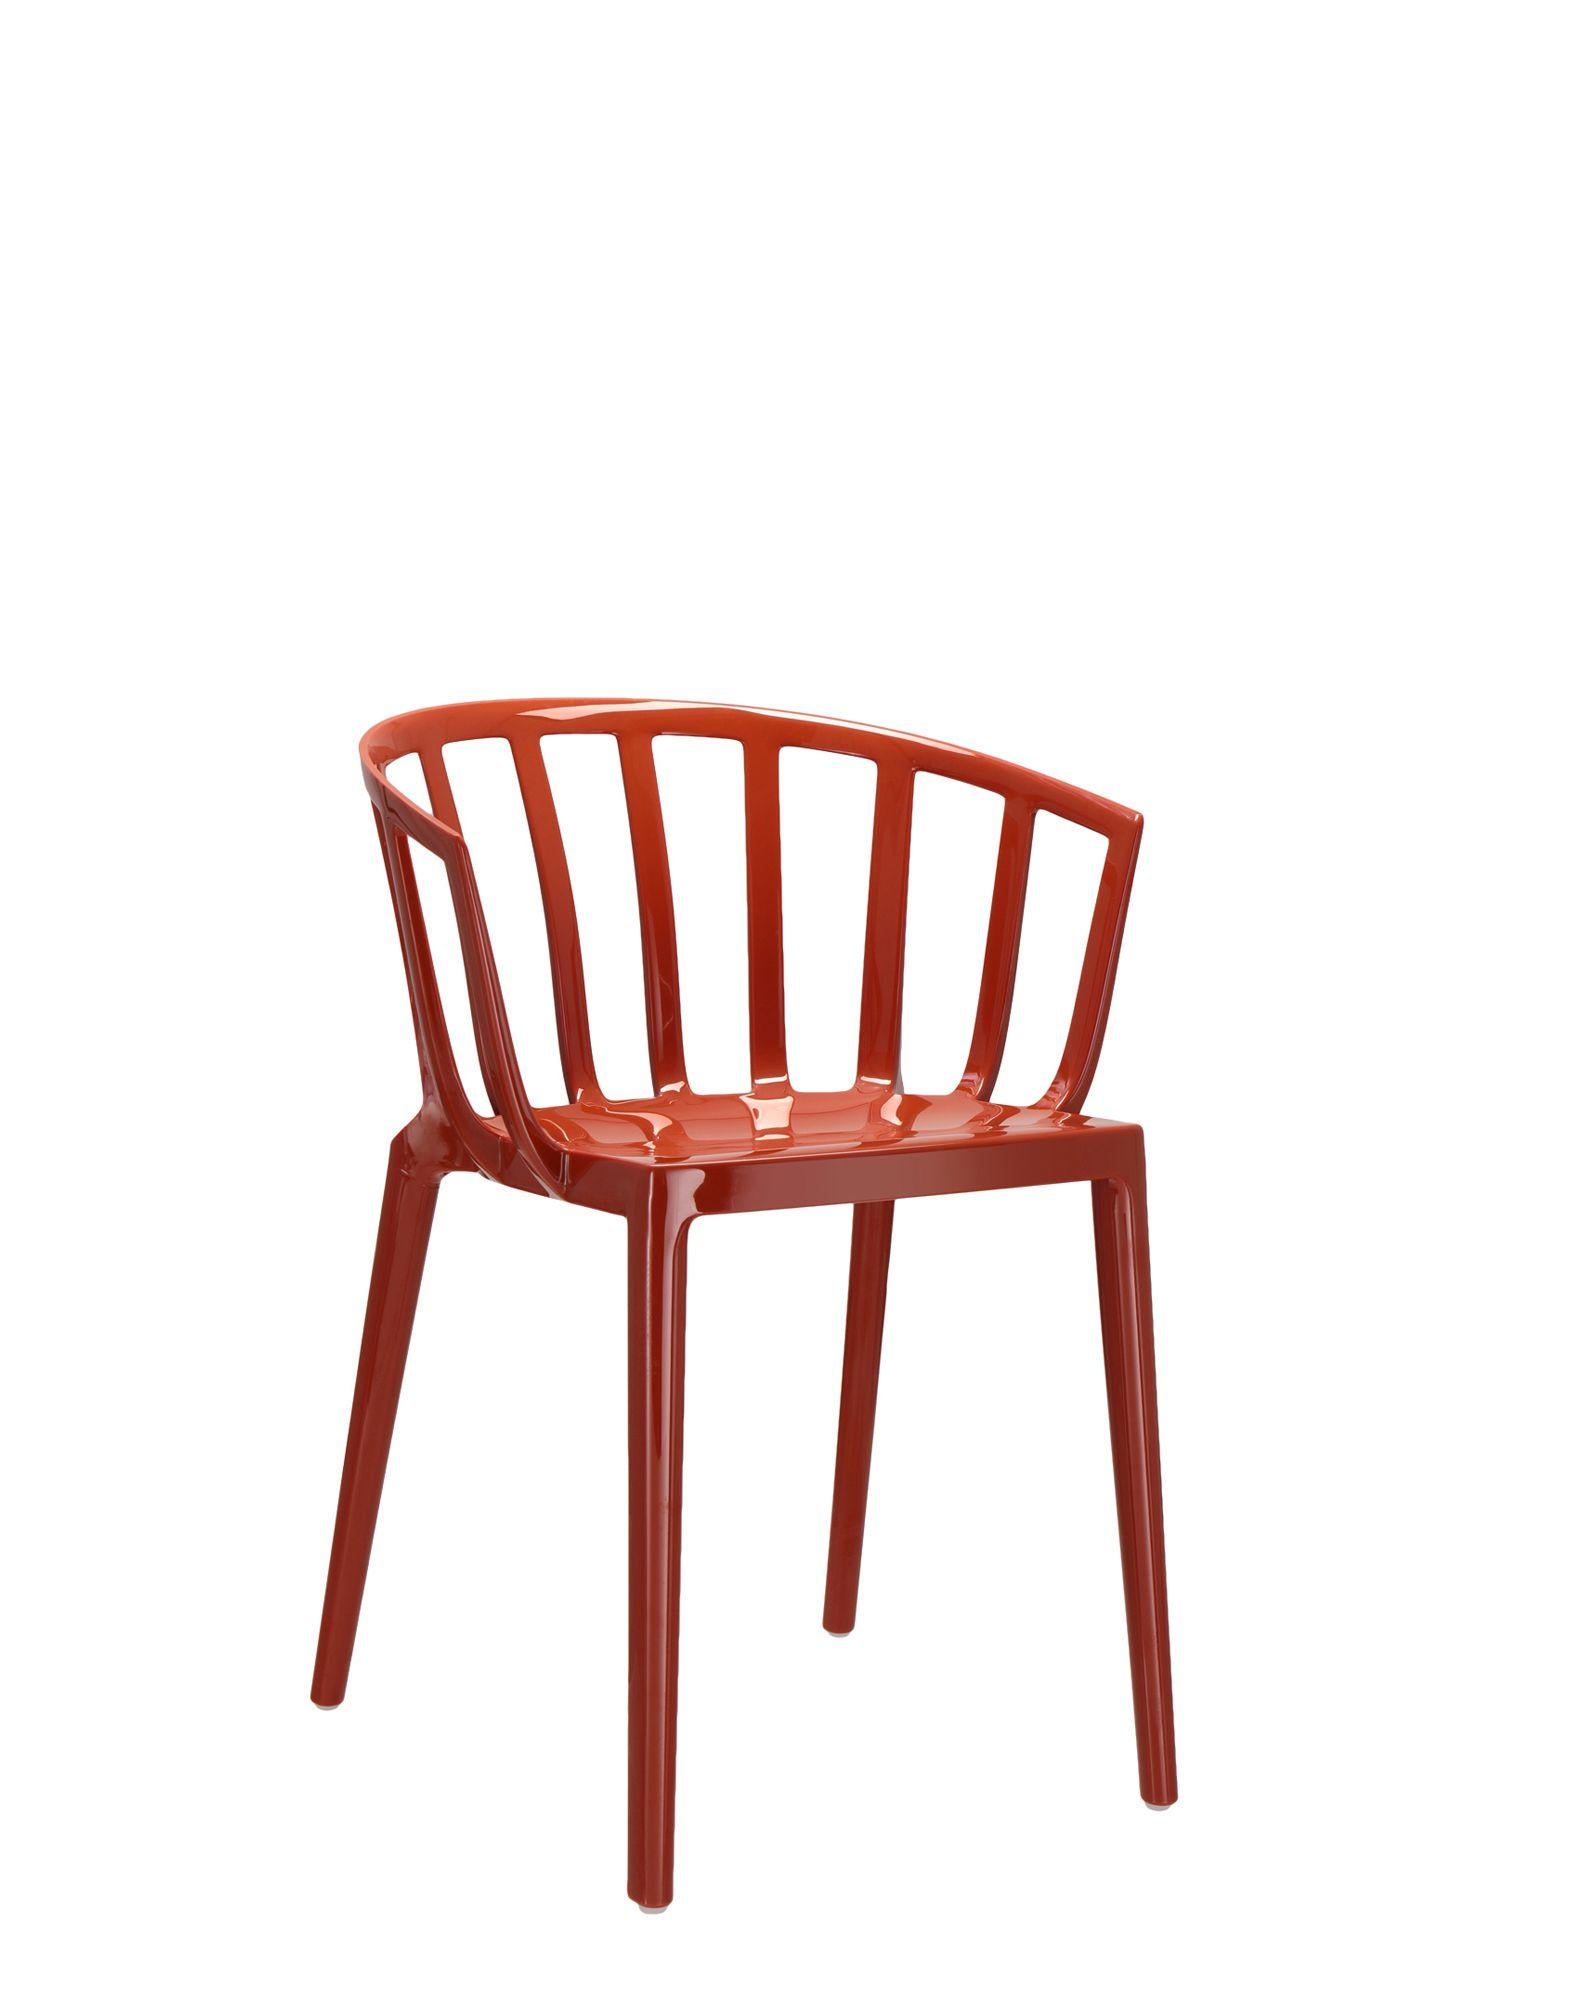 Italian Set of 2 Kartell Venice Chairs in Glossy Rusty Orange by Philippe Starck For Sale